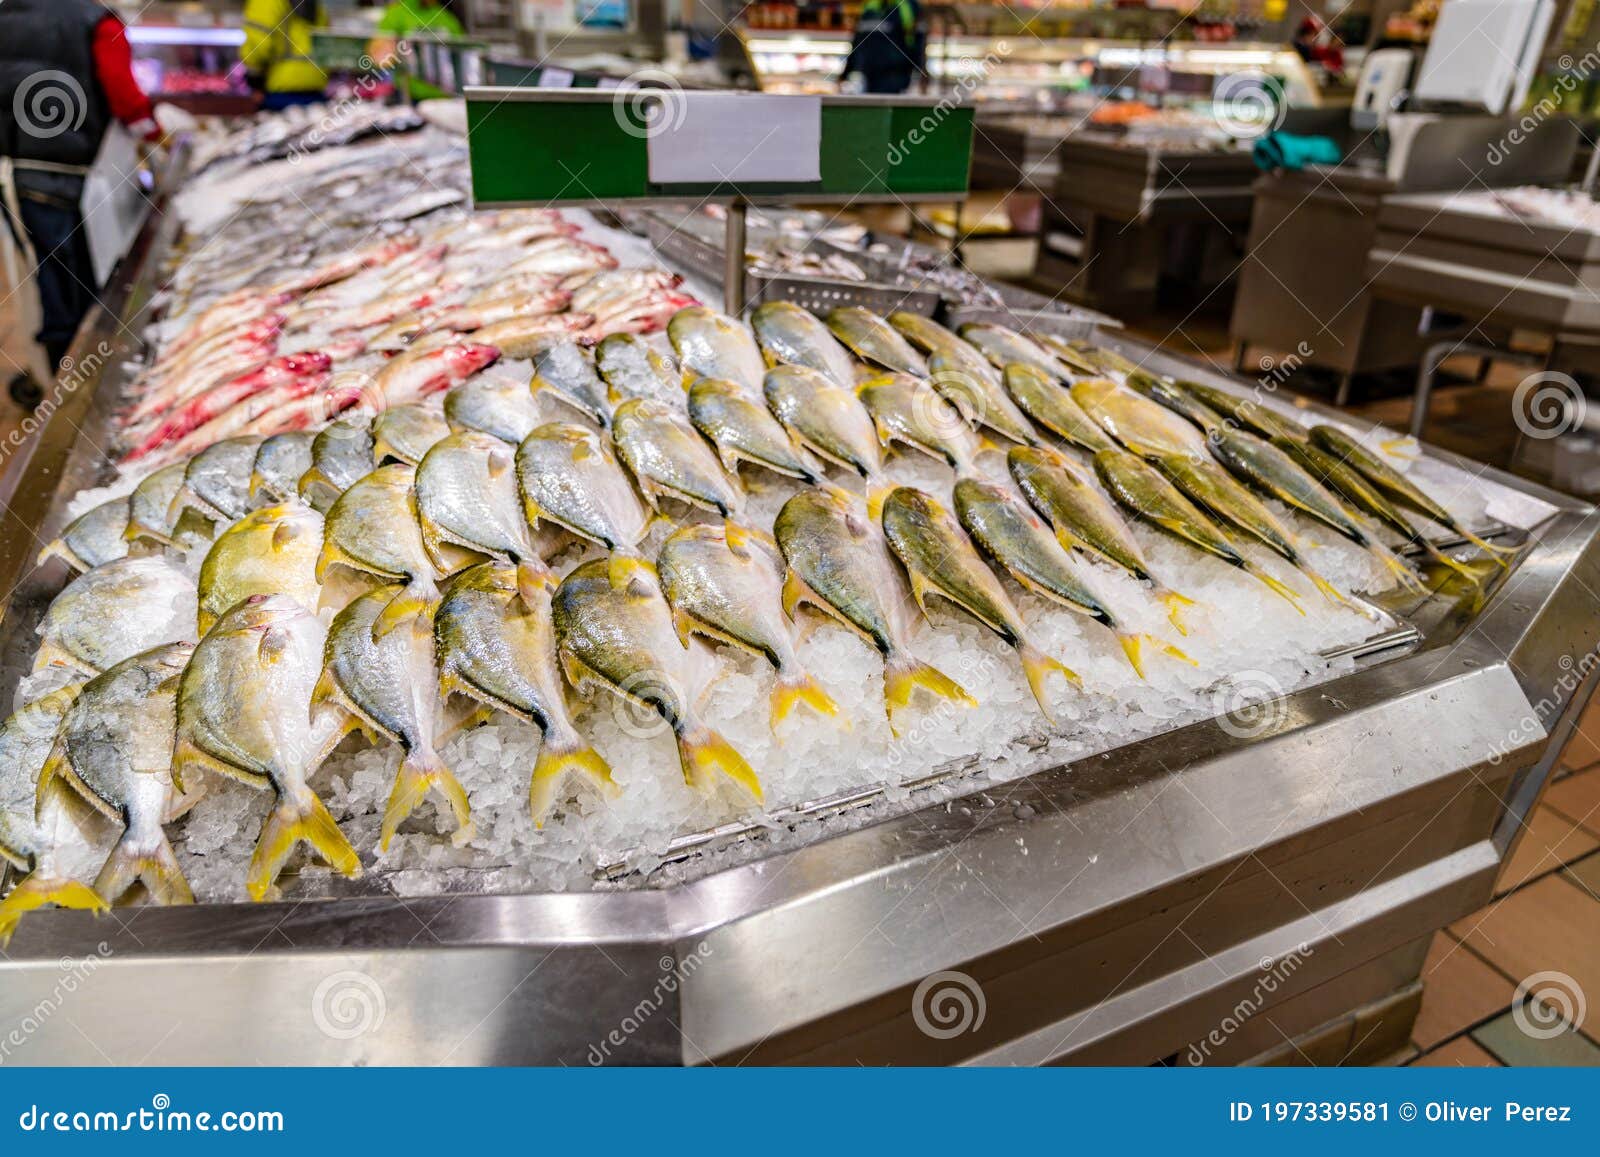 https://thumbs.dreamstime.com/z/fish-displayed-ice-supermarket-seafood-aisle-fresh-cold-197339581.jpg